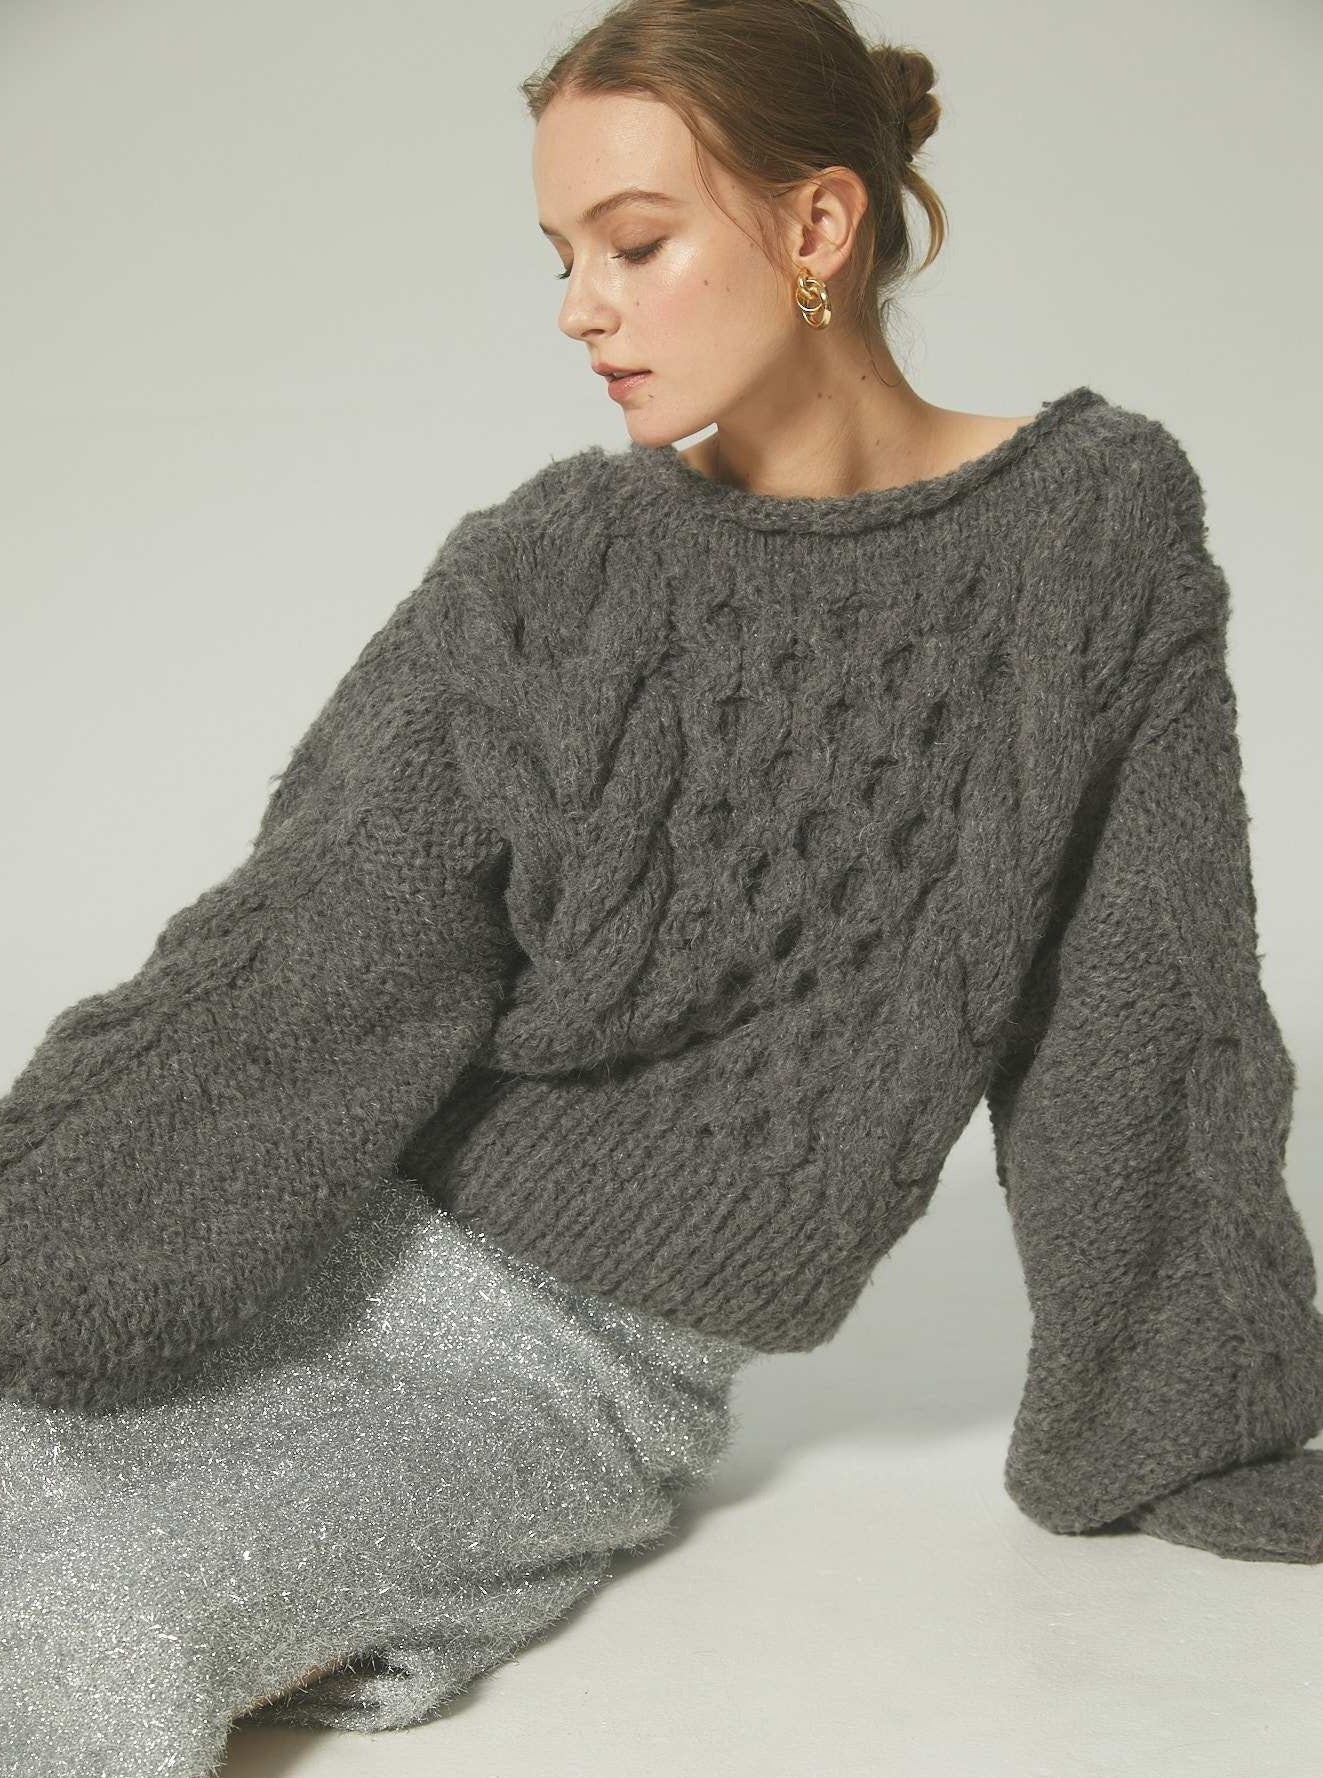 Wool Warm Cable Knit Sweater T924 – Tiffy mohair